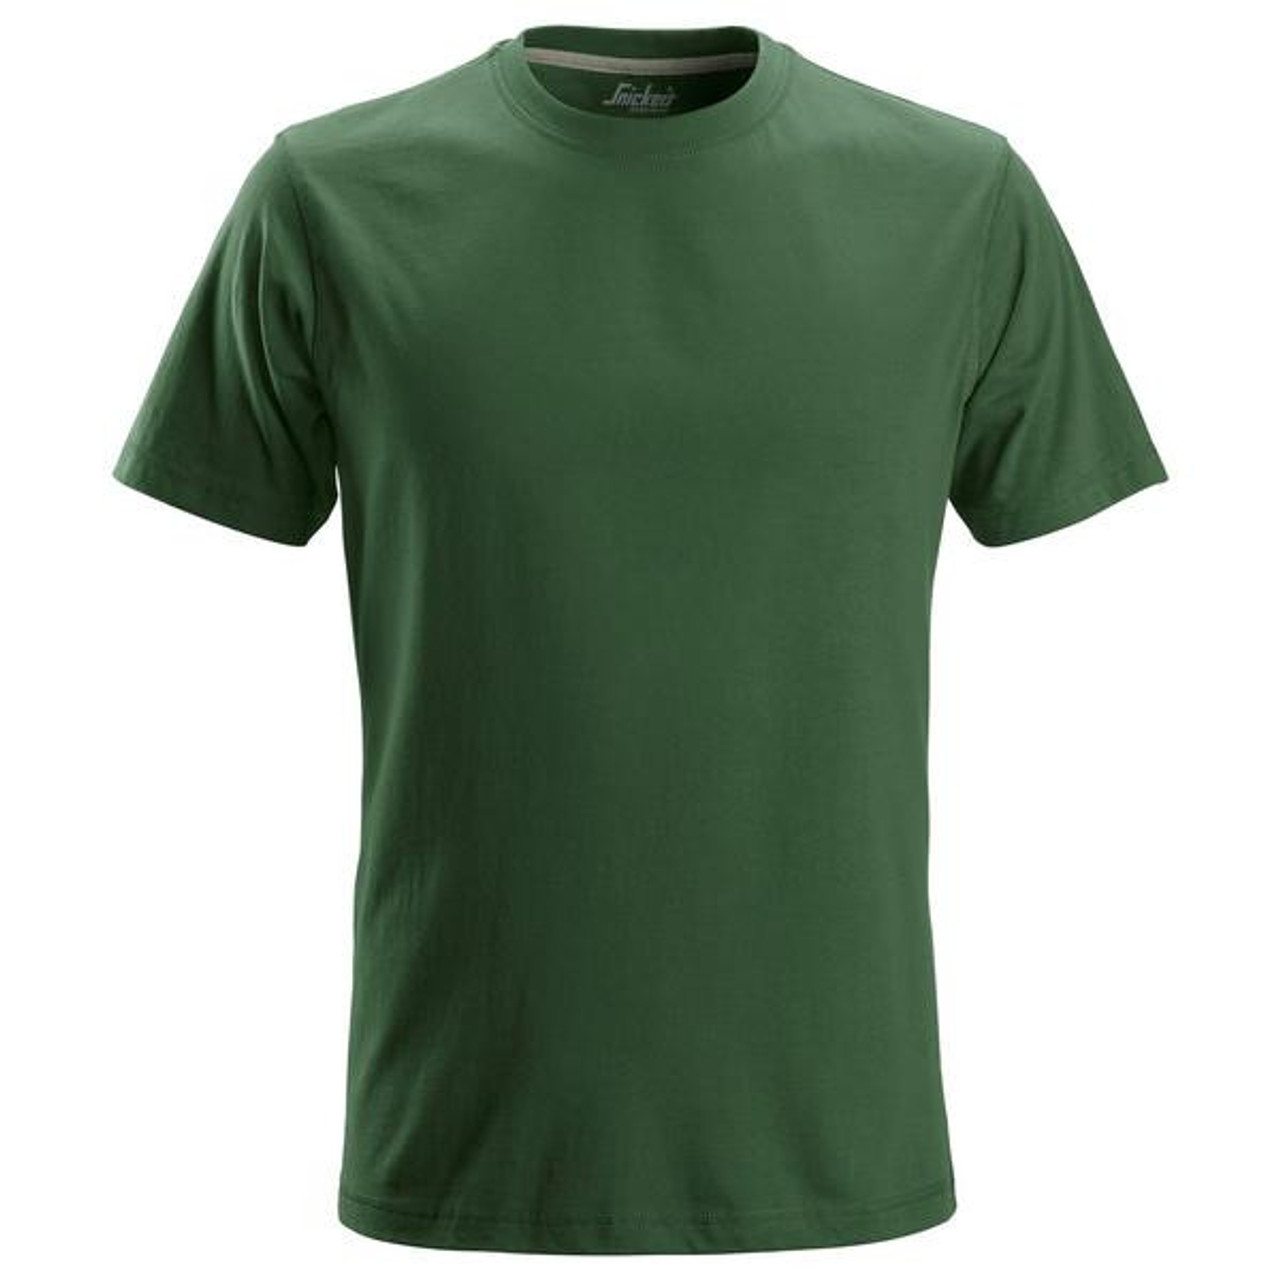 Snickers Workwear Classic T-shirt for uniforms and workwear in humid conditions such as areas like Townsville, Cairns and North Queensland. This style of euro workwear with UPF protection is also recommended for use outdoors in Australia in New South Wales and Victoria as both euro workwear and recreational use.